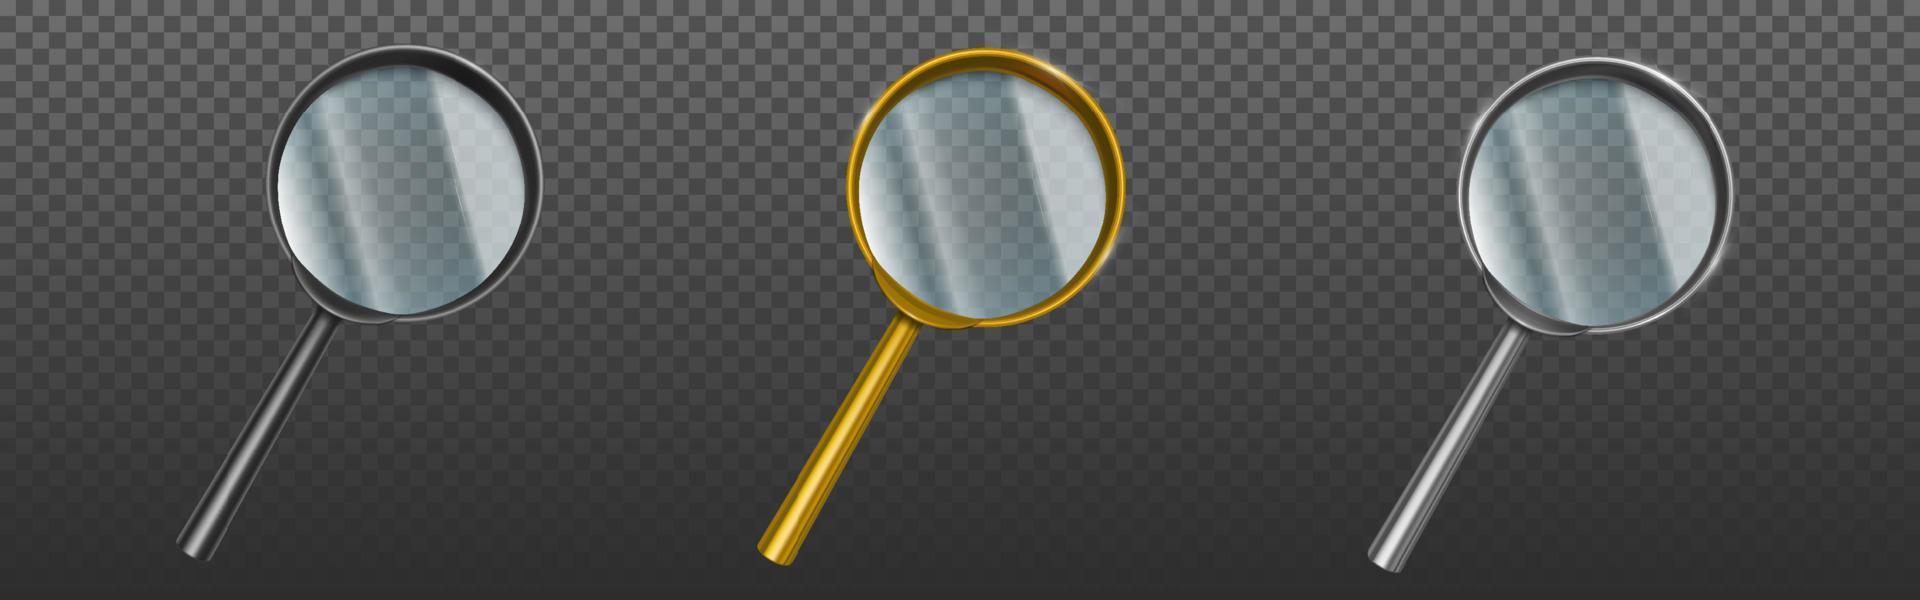 Magnifying glasses, golden, silver and black loupe vector